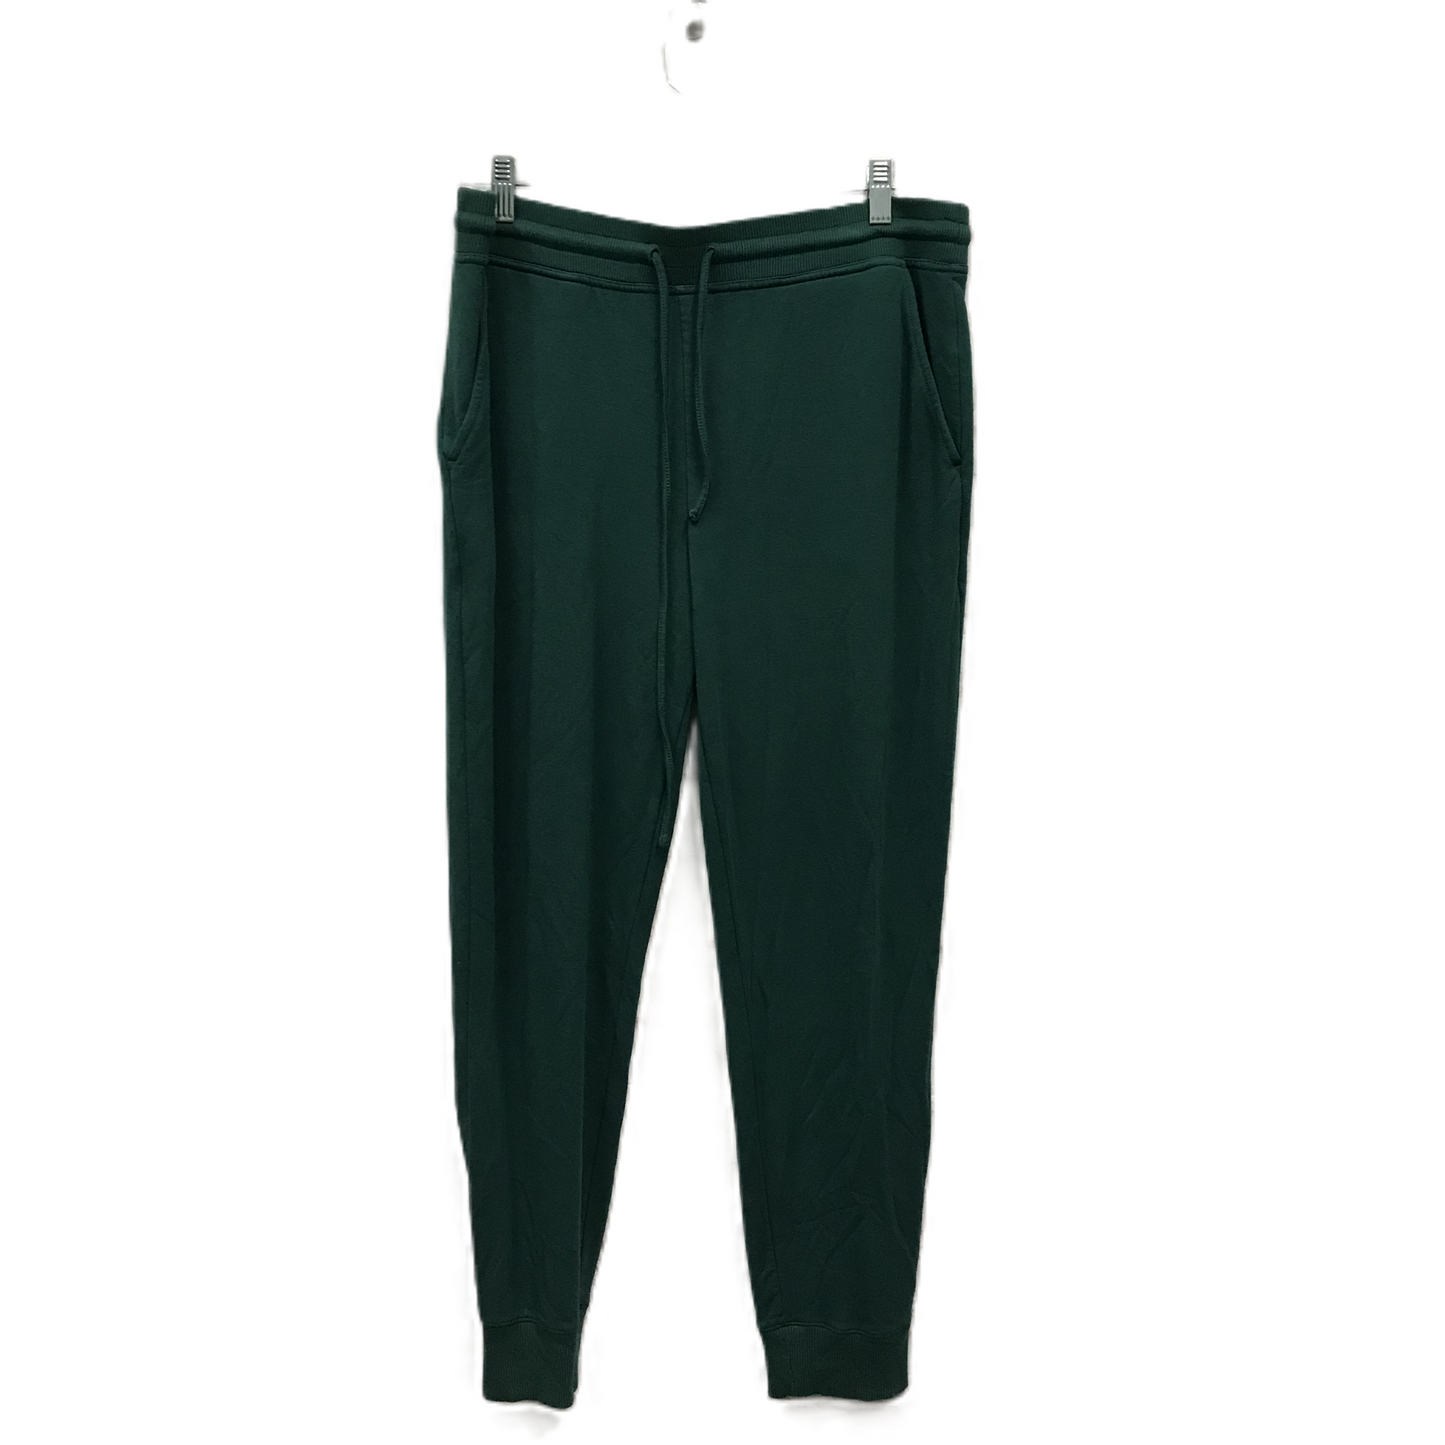 Green Athletic Pants By Vineyard Vines, Size: M